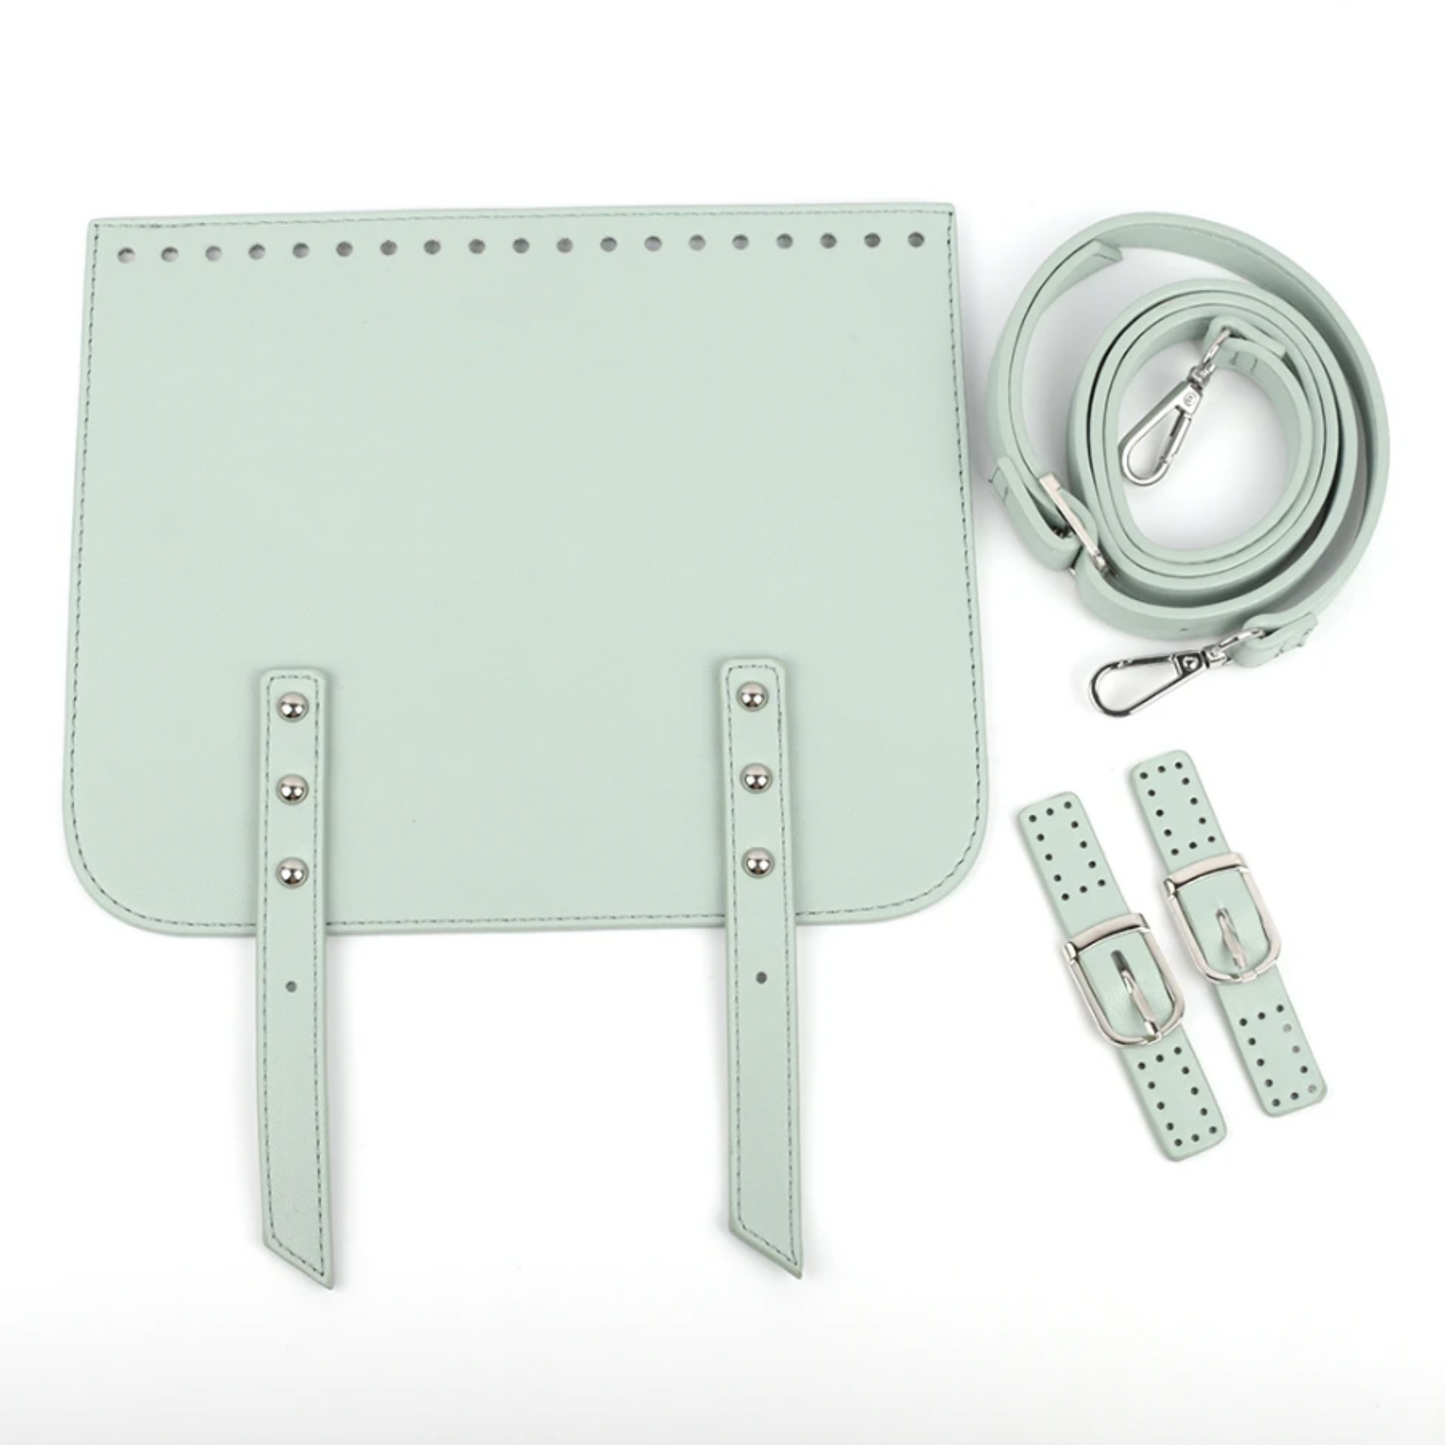 Crochet bag leather kit with flap and strap